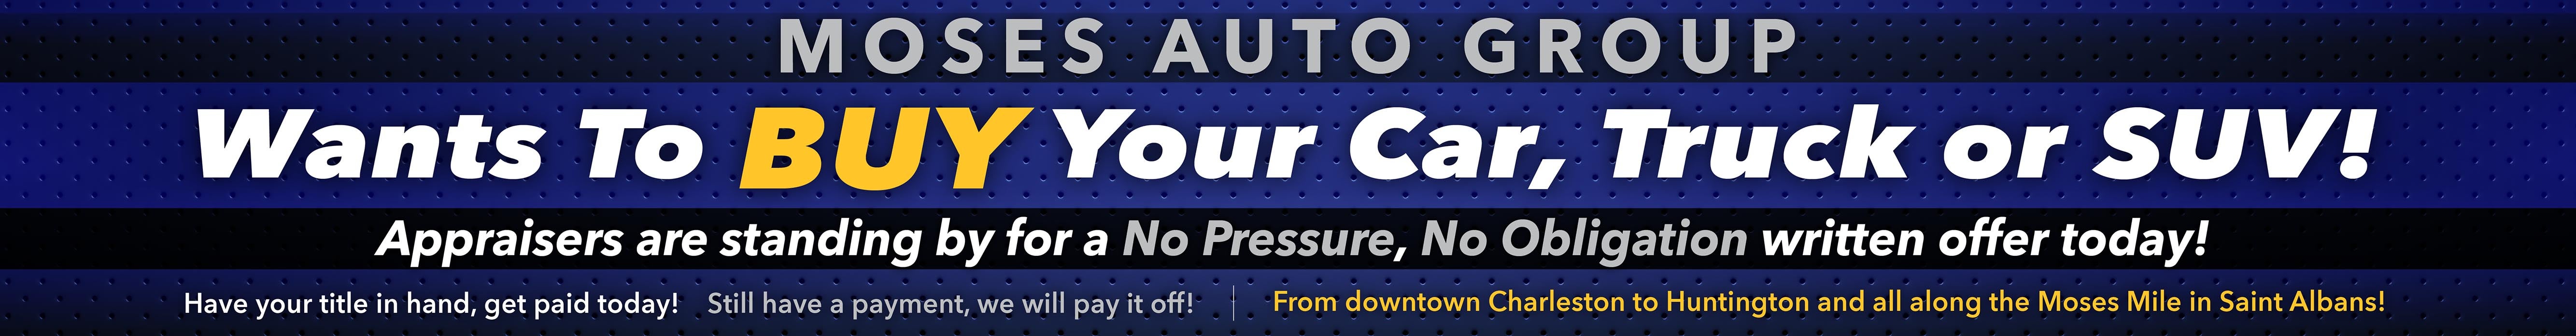 Moses Auto Group wants to buy your car, truck, or suv!